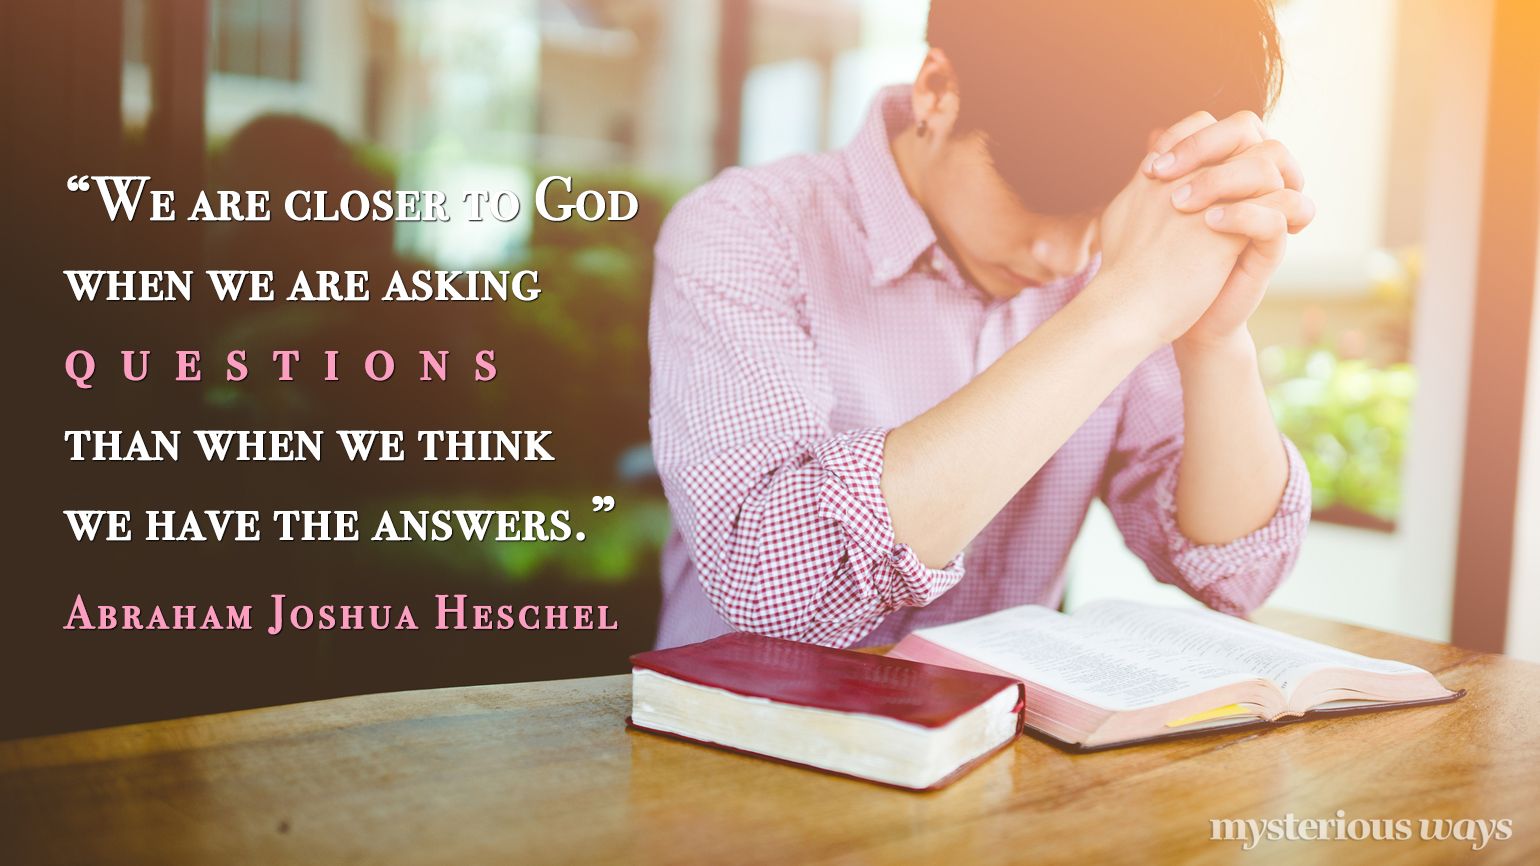 “We are closer to God when we are asking questions than when we think we have the answers.”